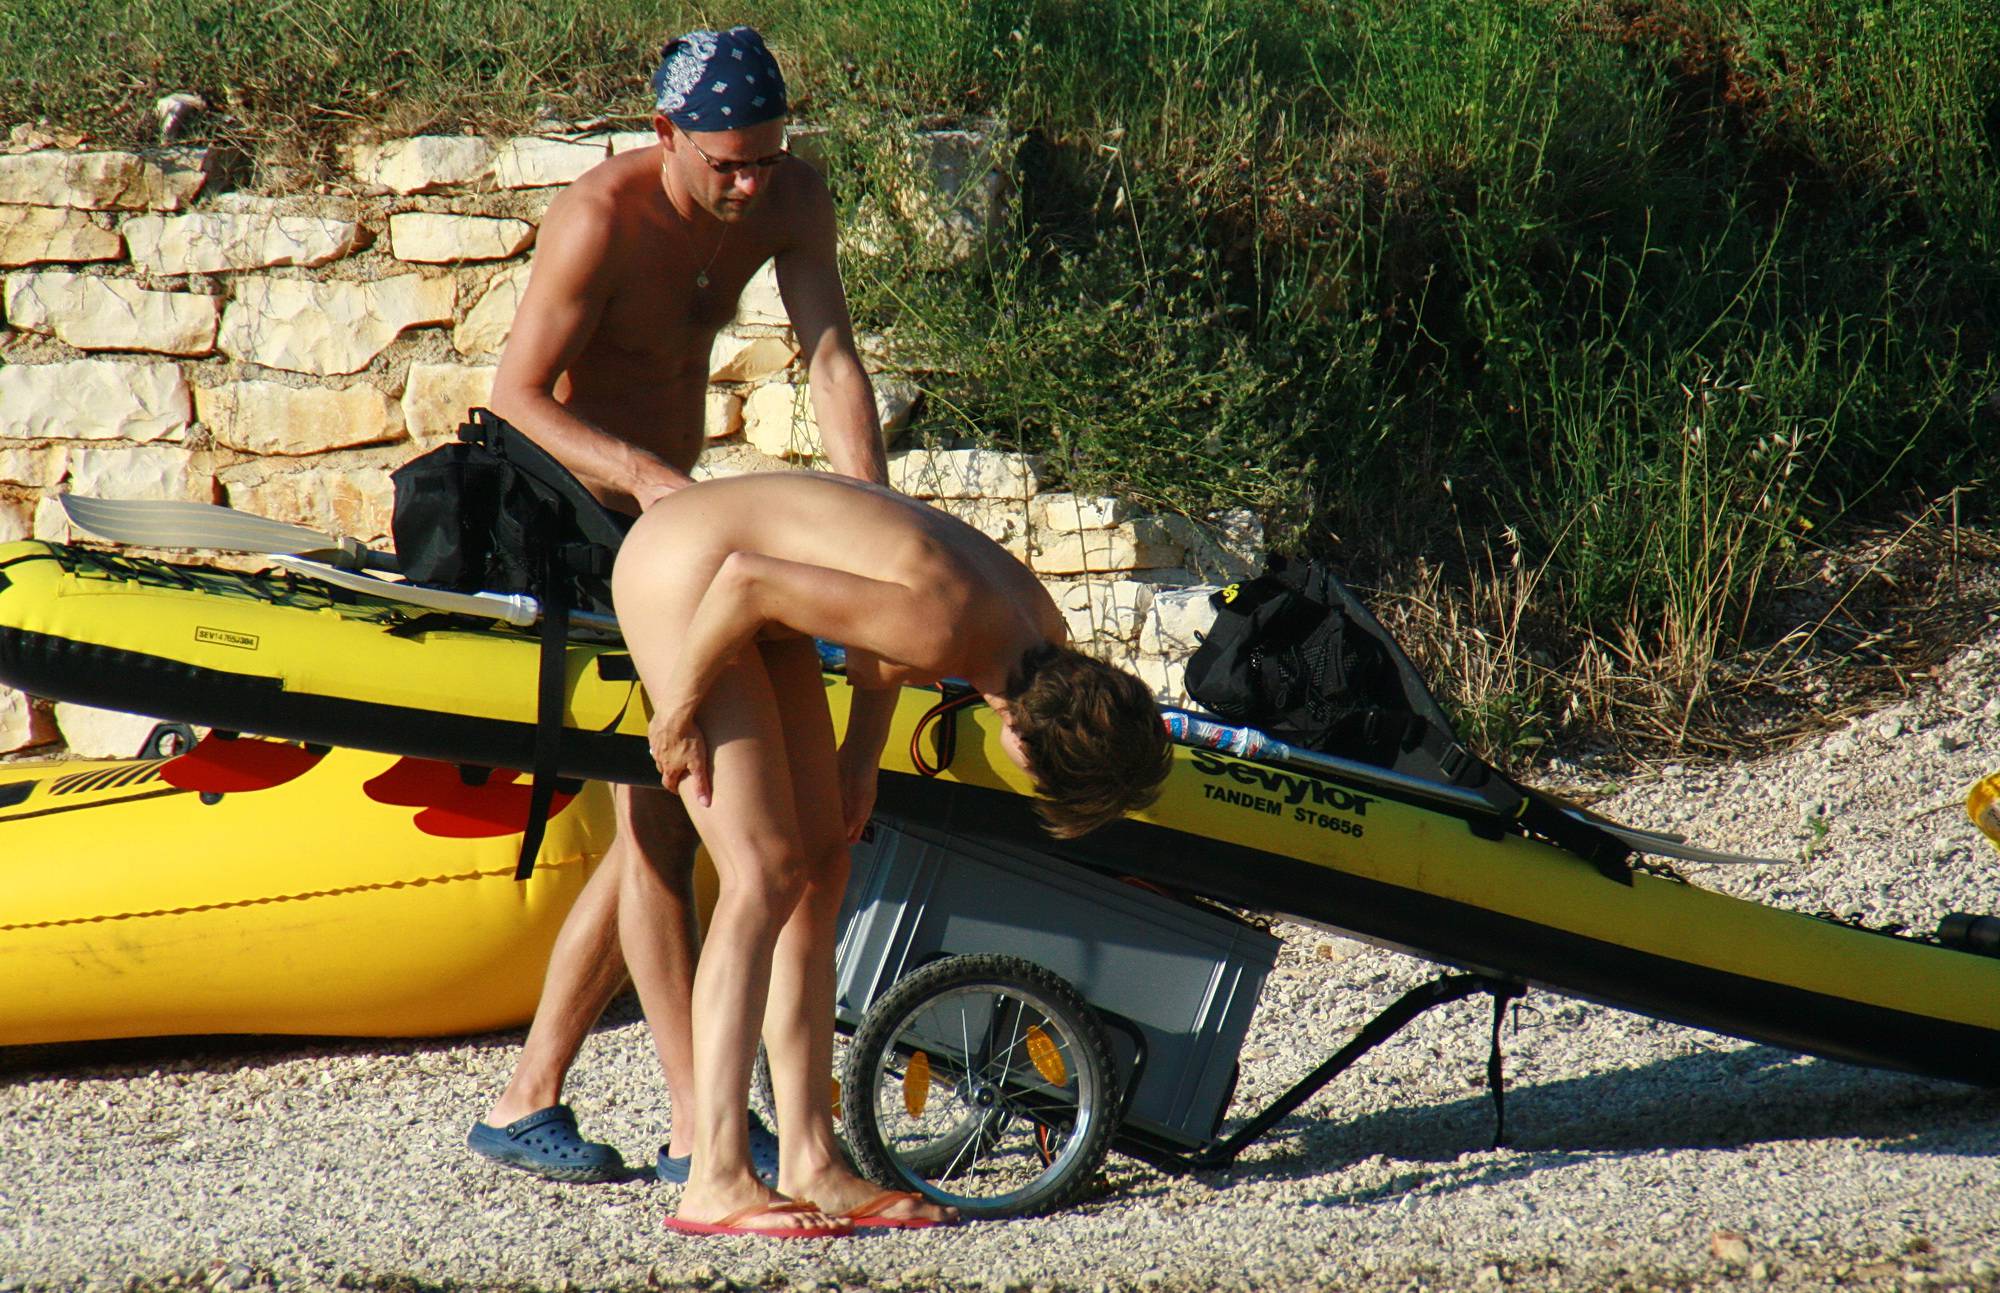 Pure Nudism Pics-Rafting Team Excursions - 1